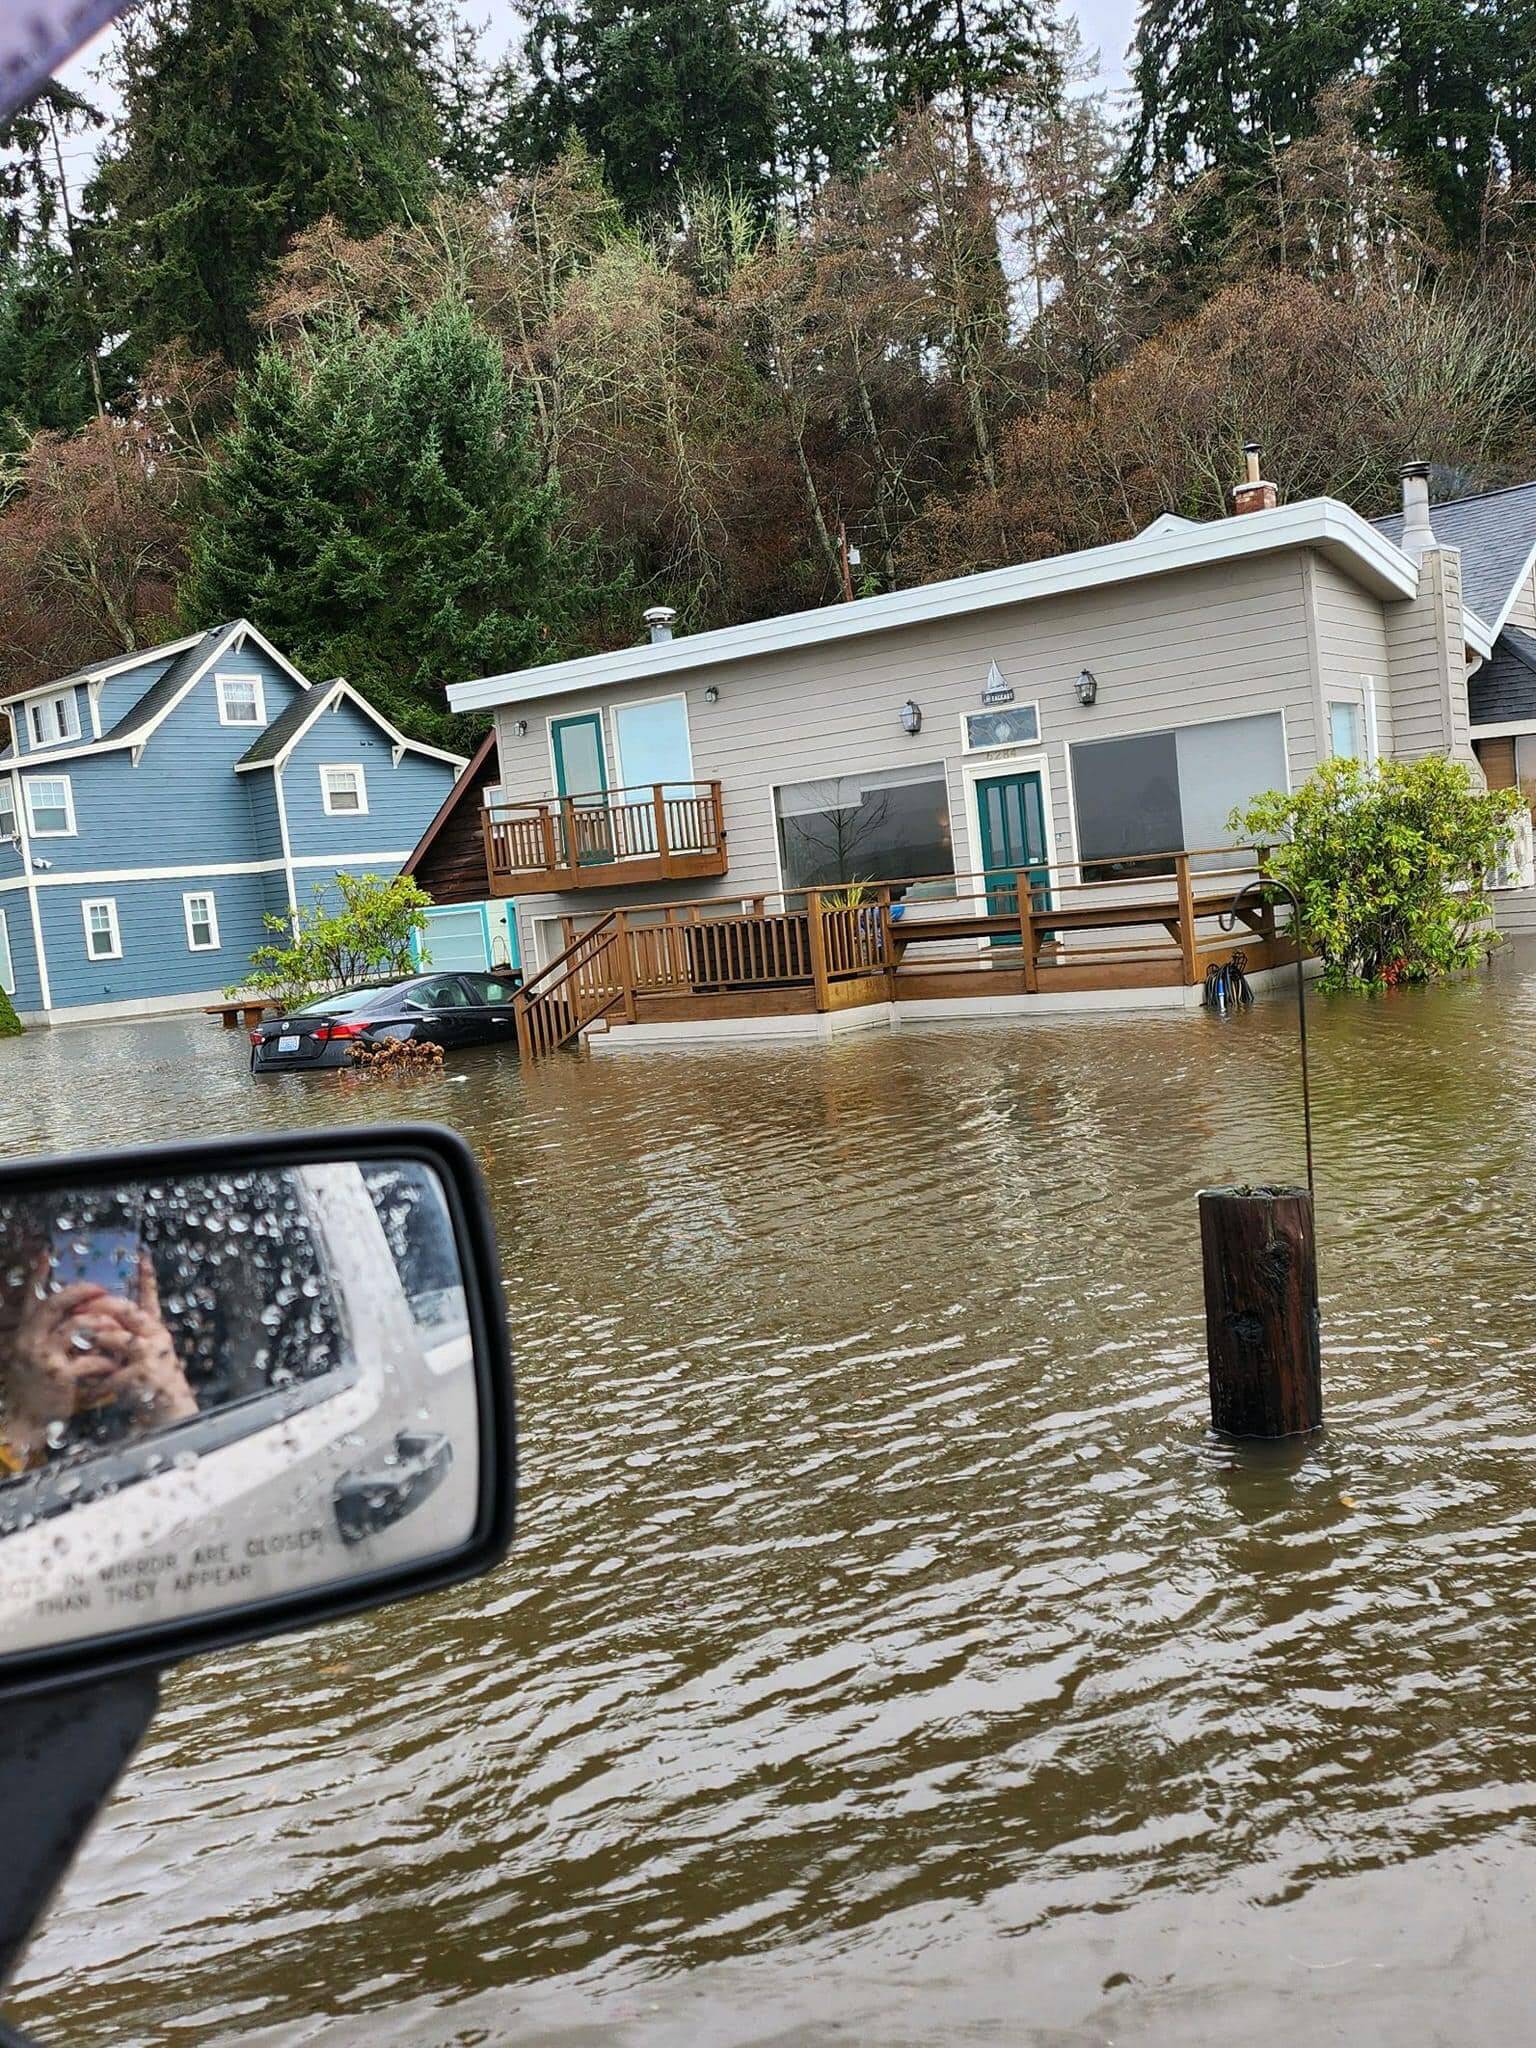 Flooding in Clinton reached high levels on Tuesday. (Photo provided)